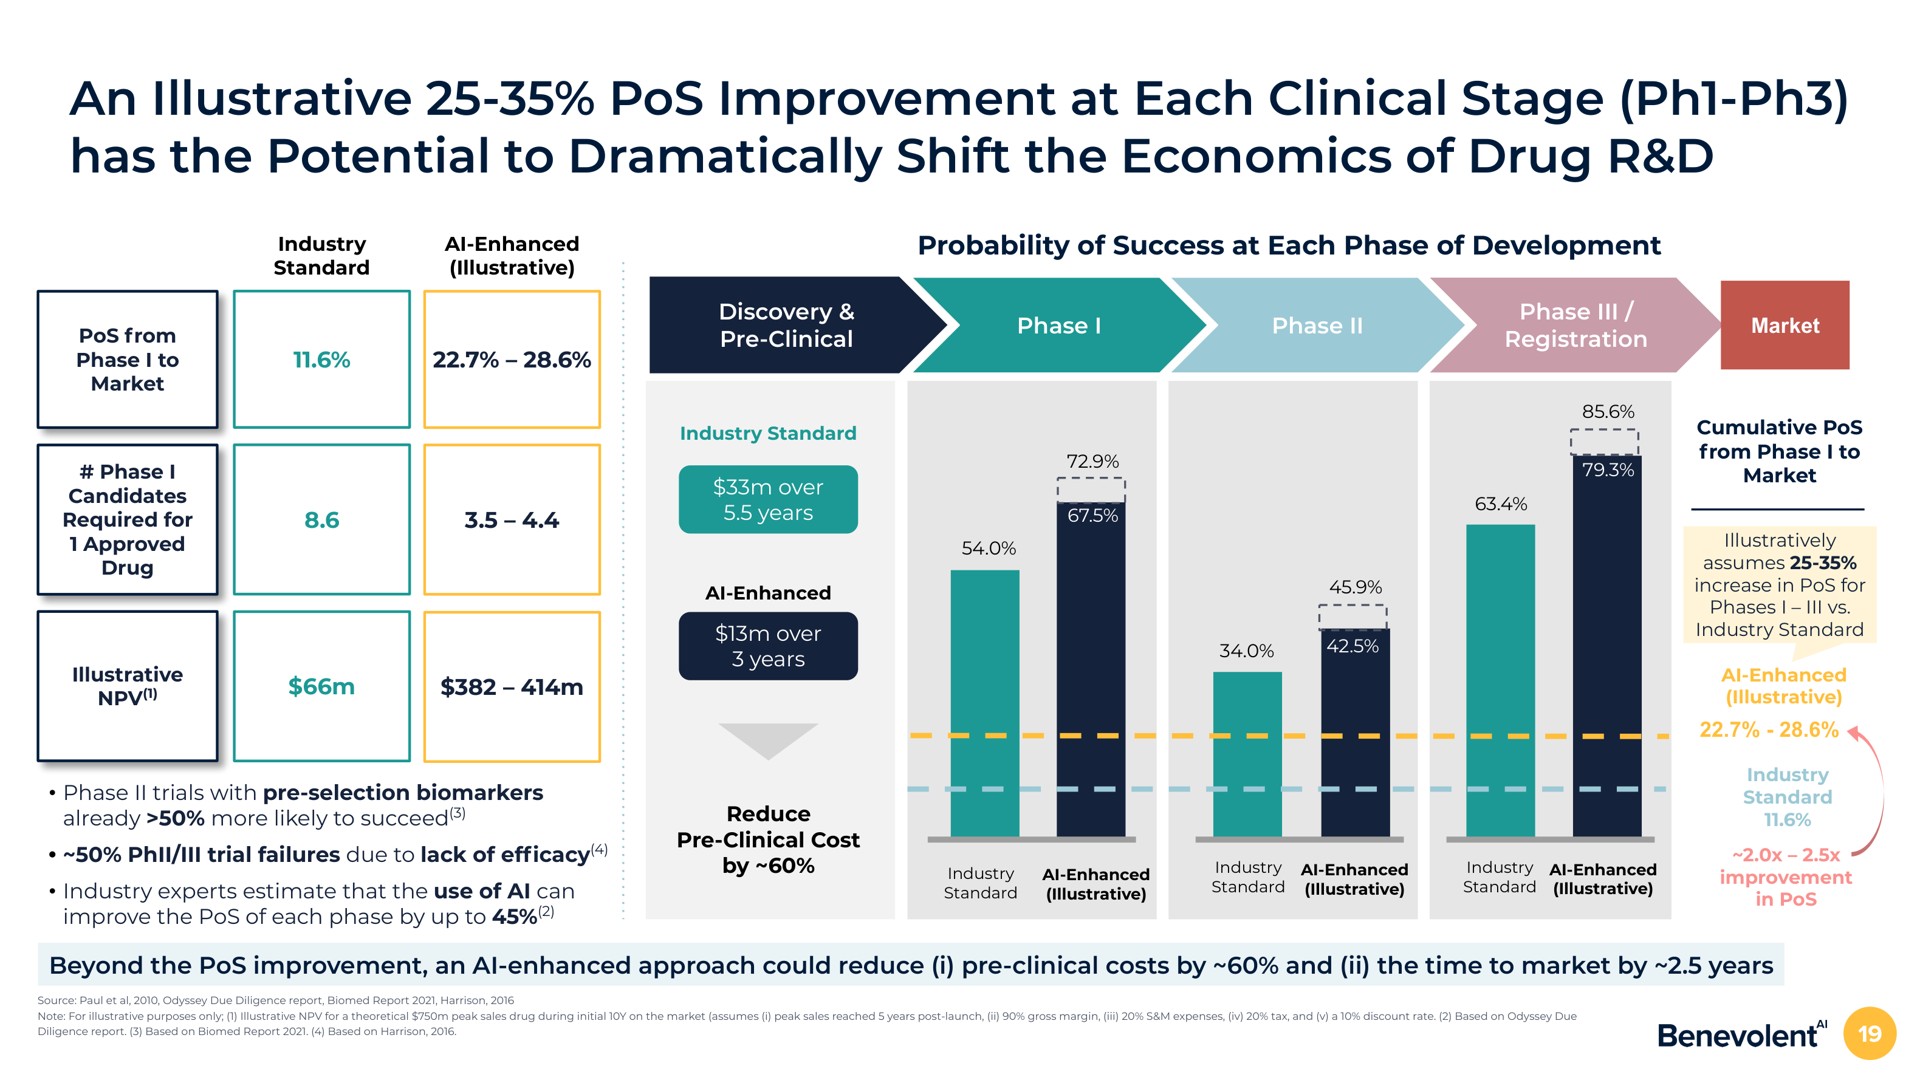 an illustrative pos improvement at each clinical stage has the potential to dramatically shift the economics of drug discovery clinical probability of success at each phase of development phase i phase phase registration beyond the pos improvement an enhanced approach could reduce i clinical costs by and the time to market by years | BenevolentAI